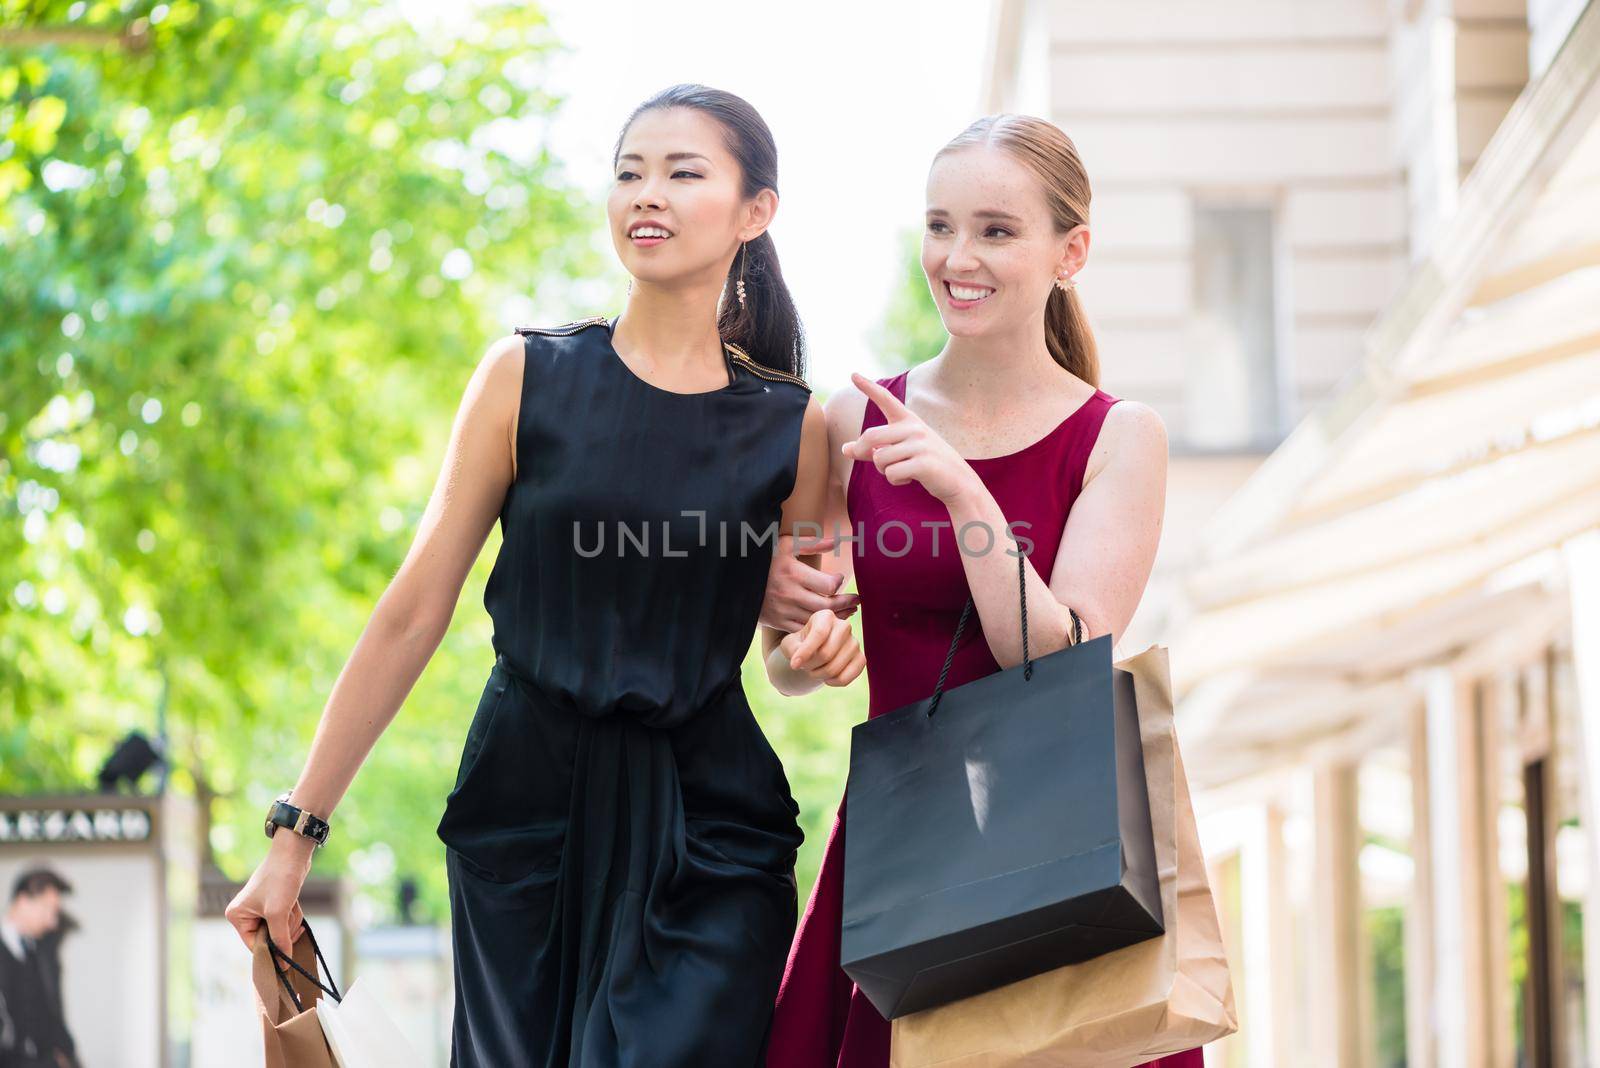 Two happy multiracial women out shopping together standing in an urban street pointing and smiling with bags over their arms